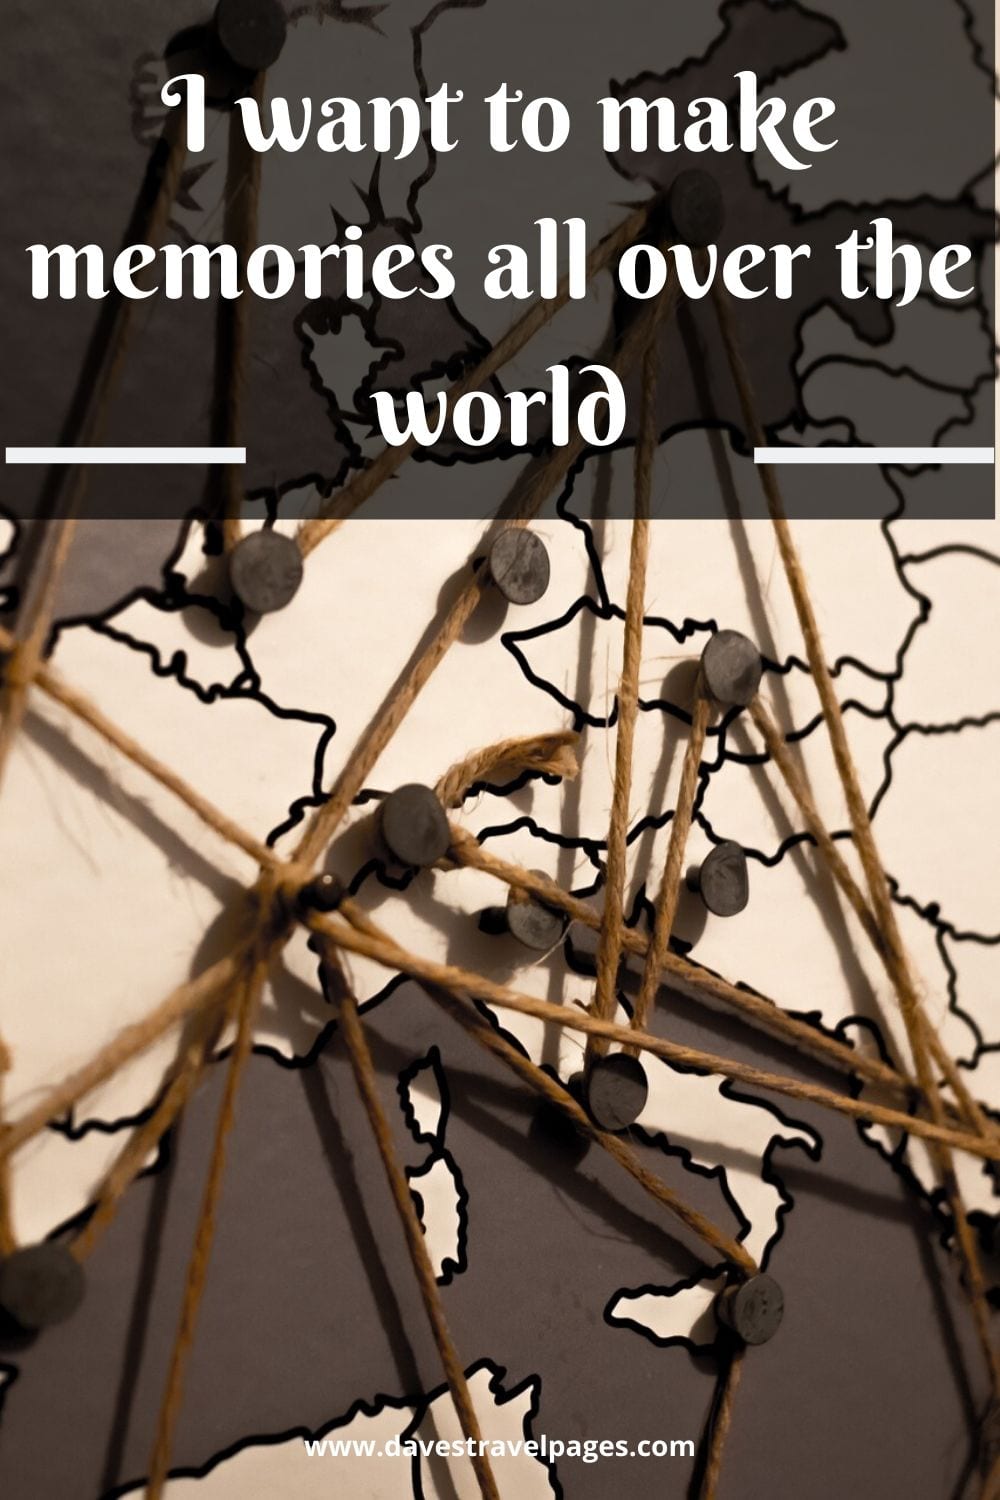 I want to make memories all over the world